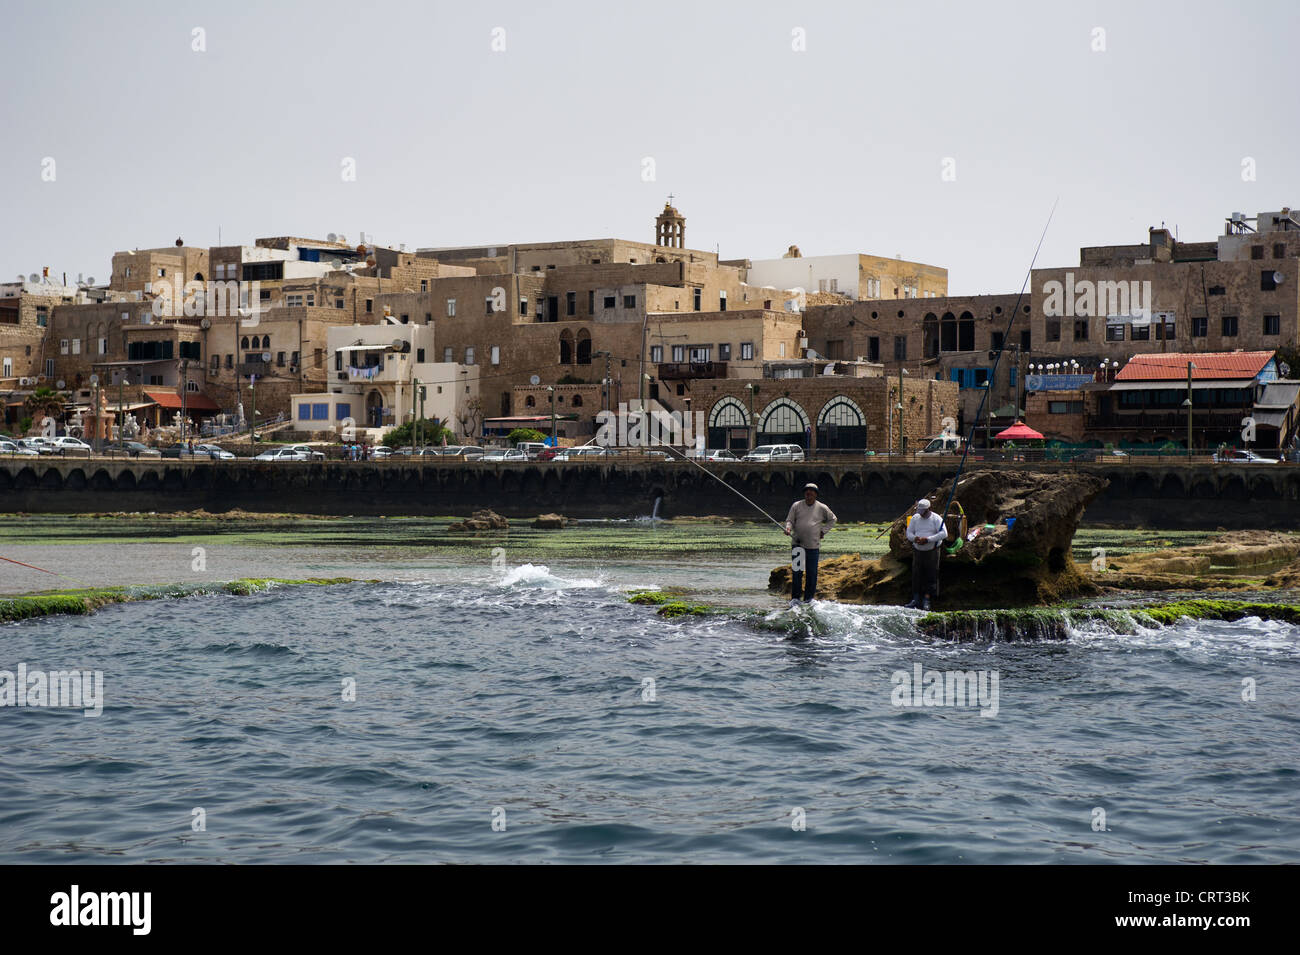 Fishers on the view of ancient crusader fortress in the town of Akko, Israel Stock Photo